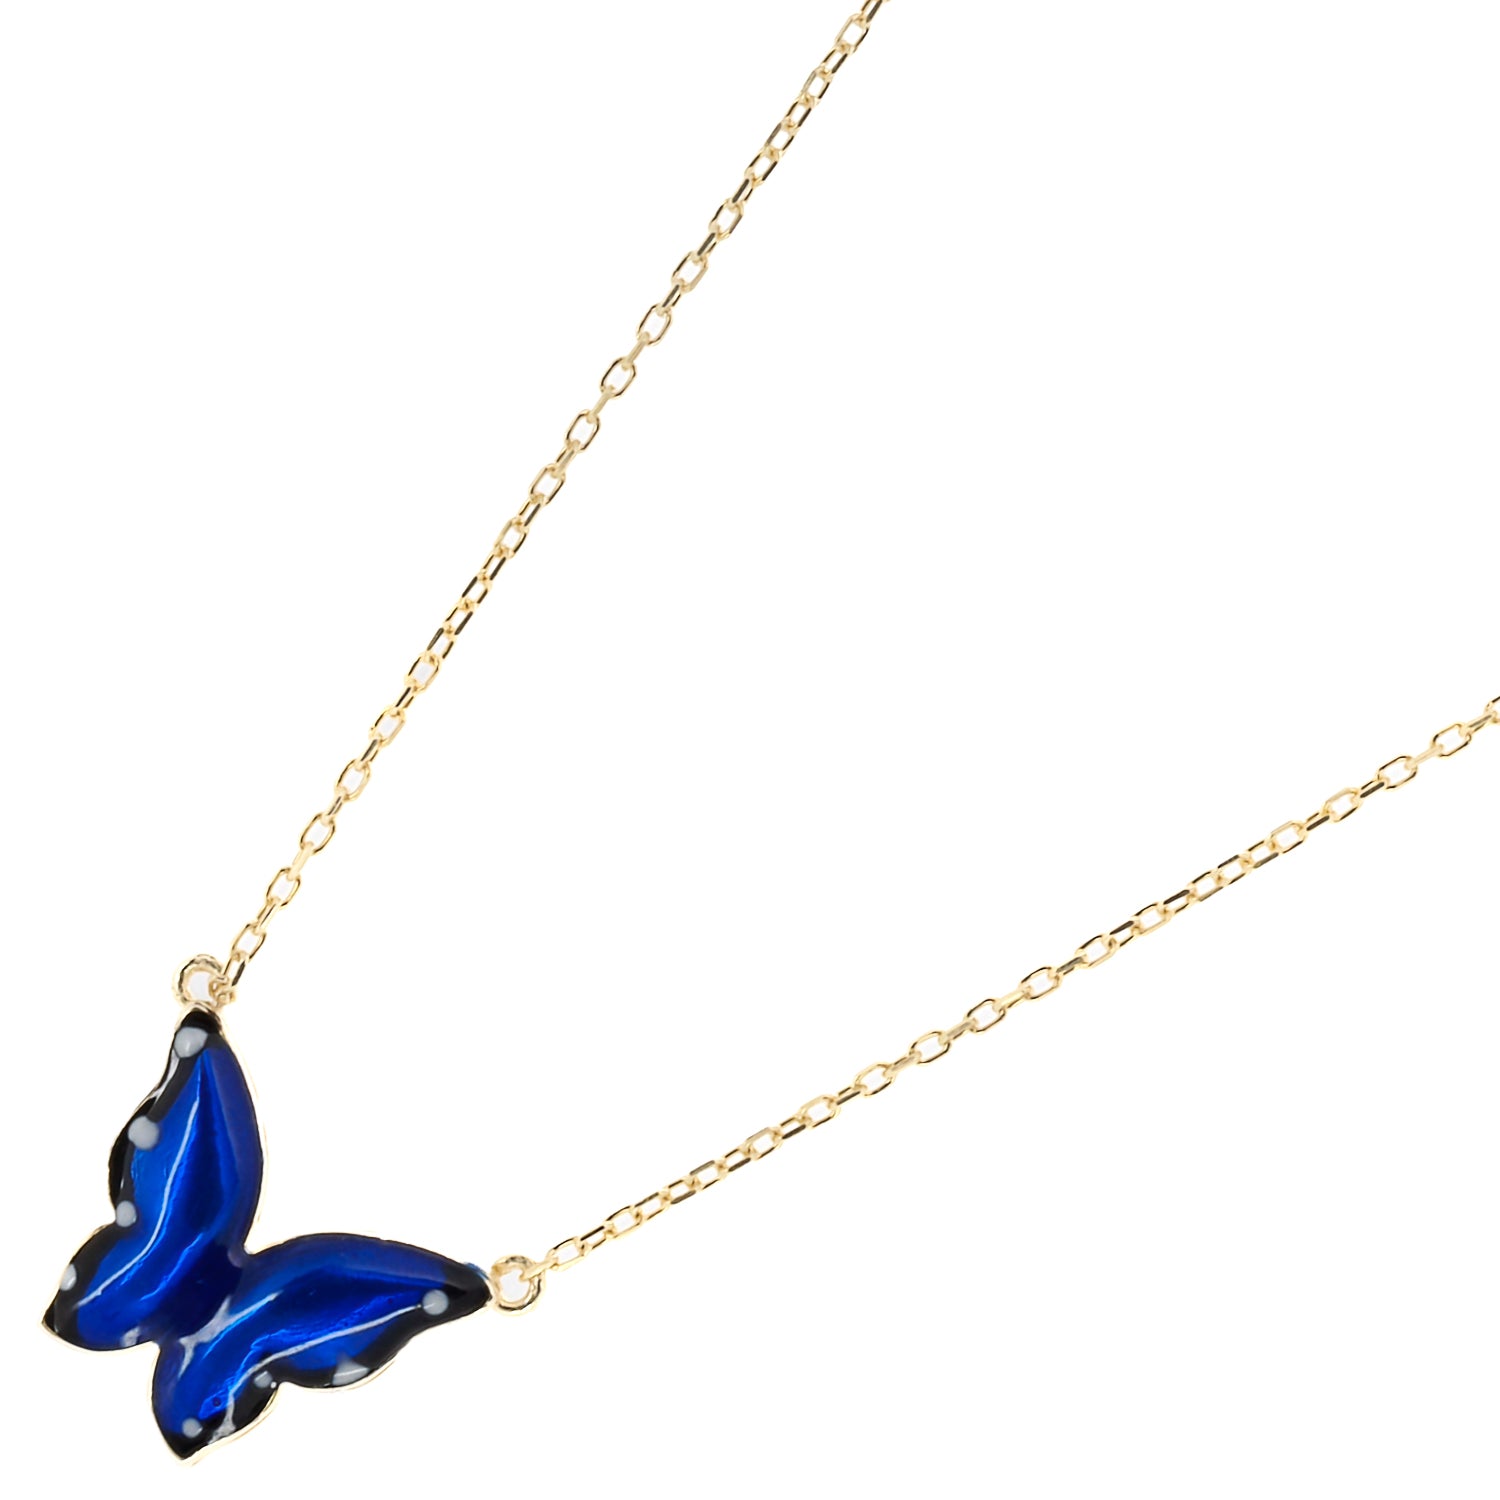 Gold Spiritual Blue Enamel Butterfly Necklace, a meaningful accessory handcrafted with love and dedication.